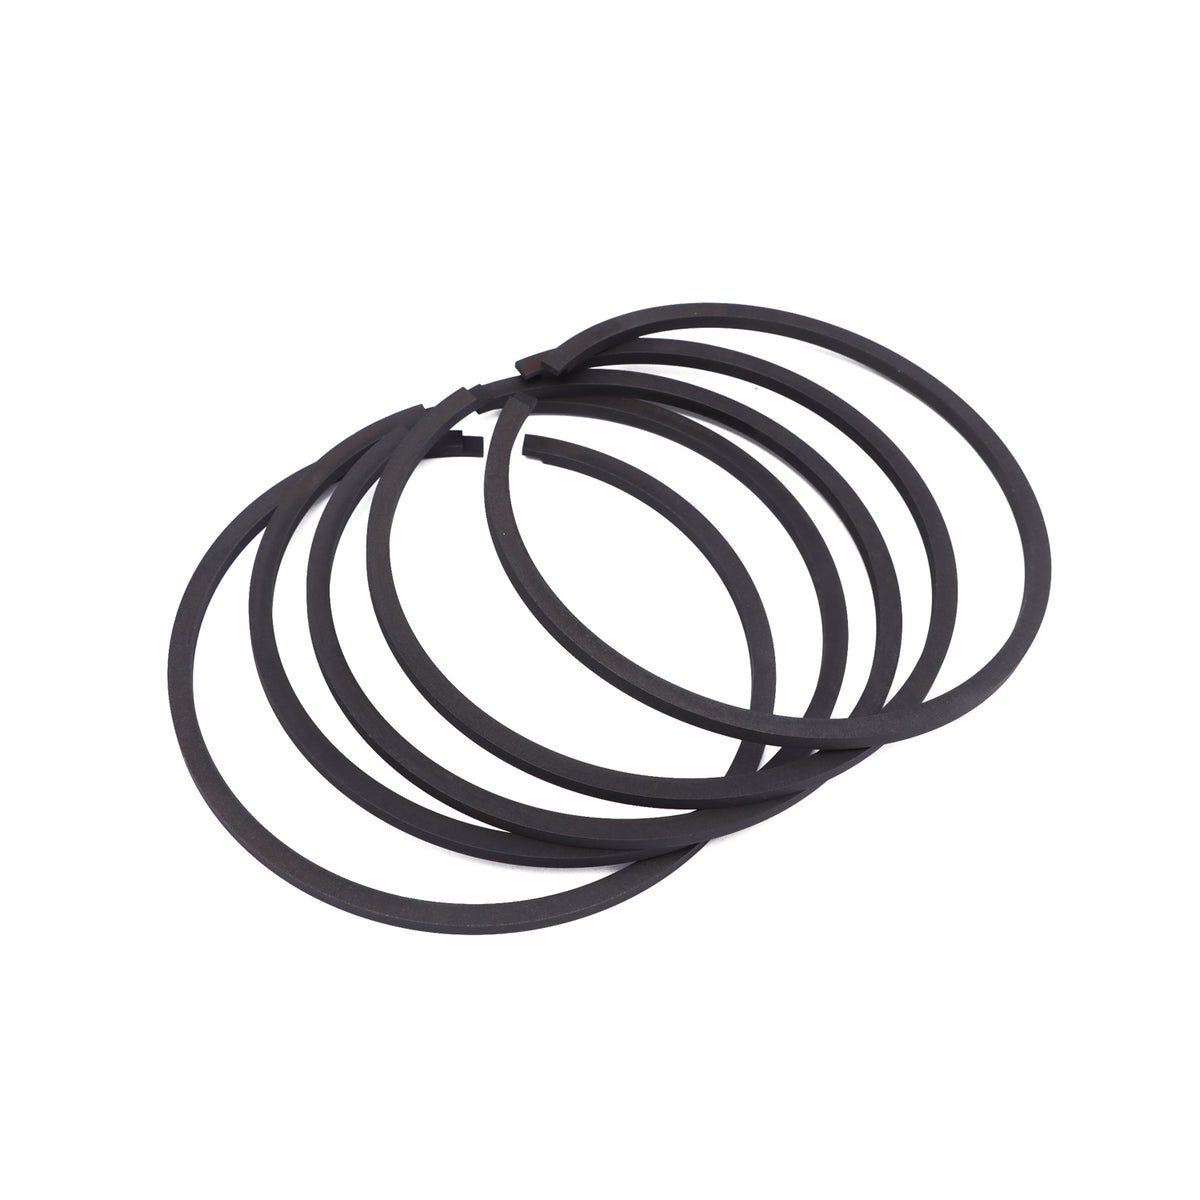 Differential Cylinder 10031492 (DN 120/80) Seal Kit for Schwing Truck-Mounted Concrete Pump, Hydraulic Main Oil Cylinder Sealing Kit for Schwing Stetter Boom Pump. - KUDUPARTS